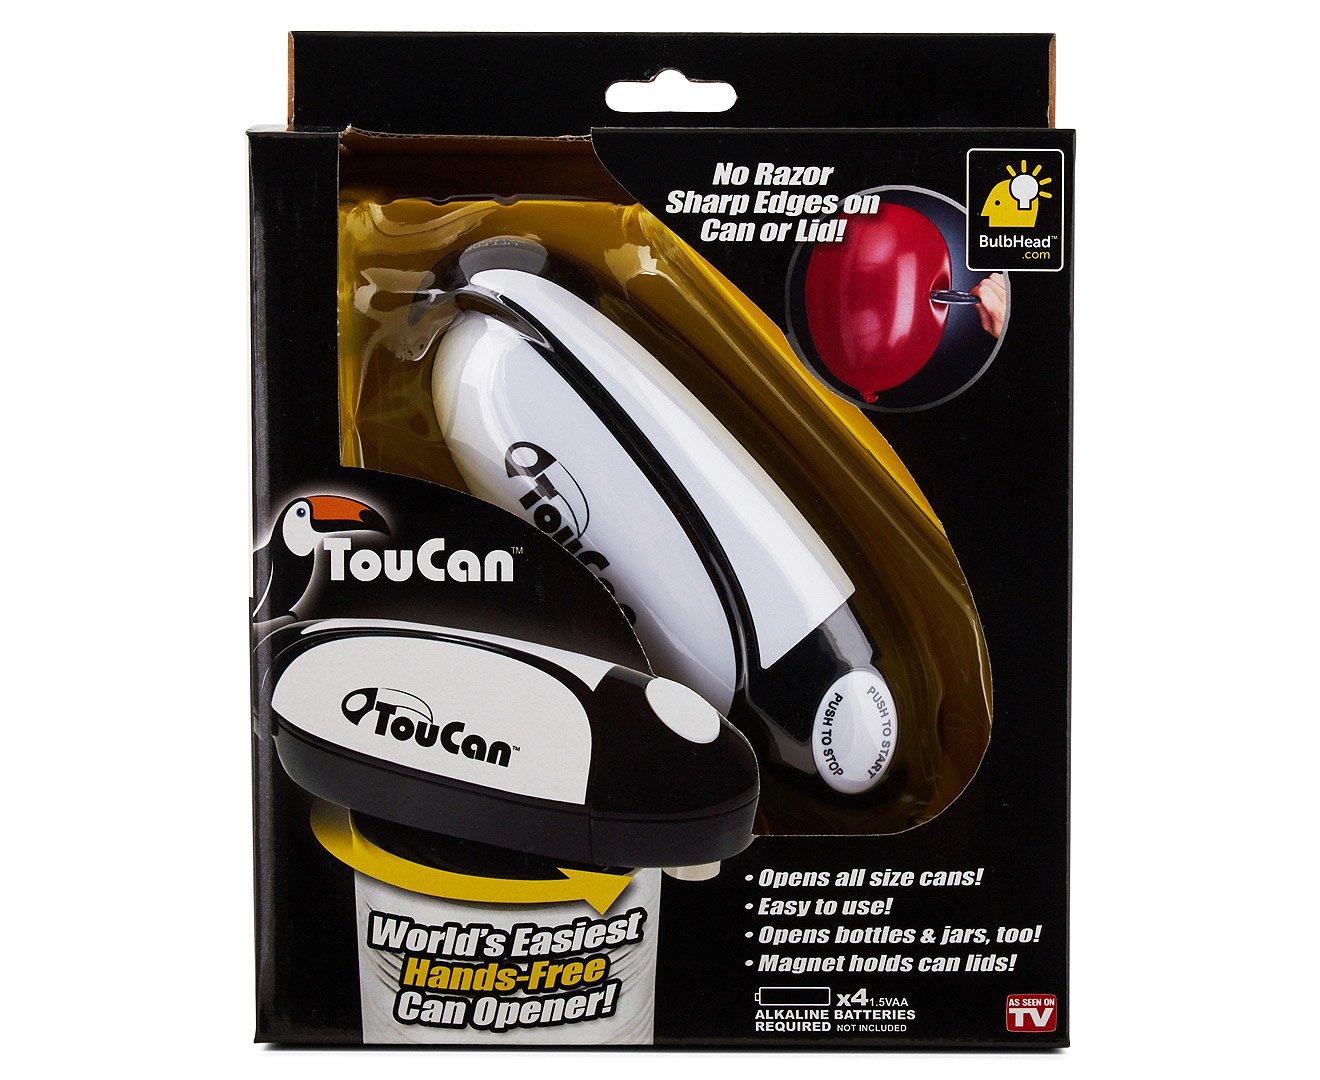 Toucan: Electric Hands-Free Can Opener